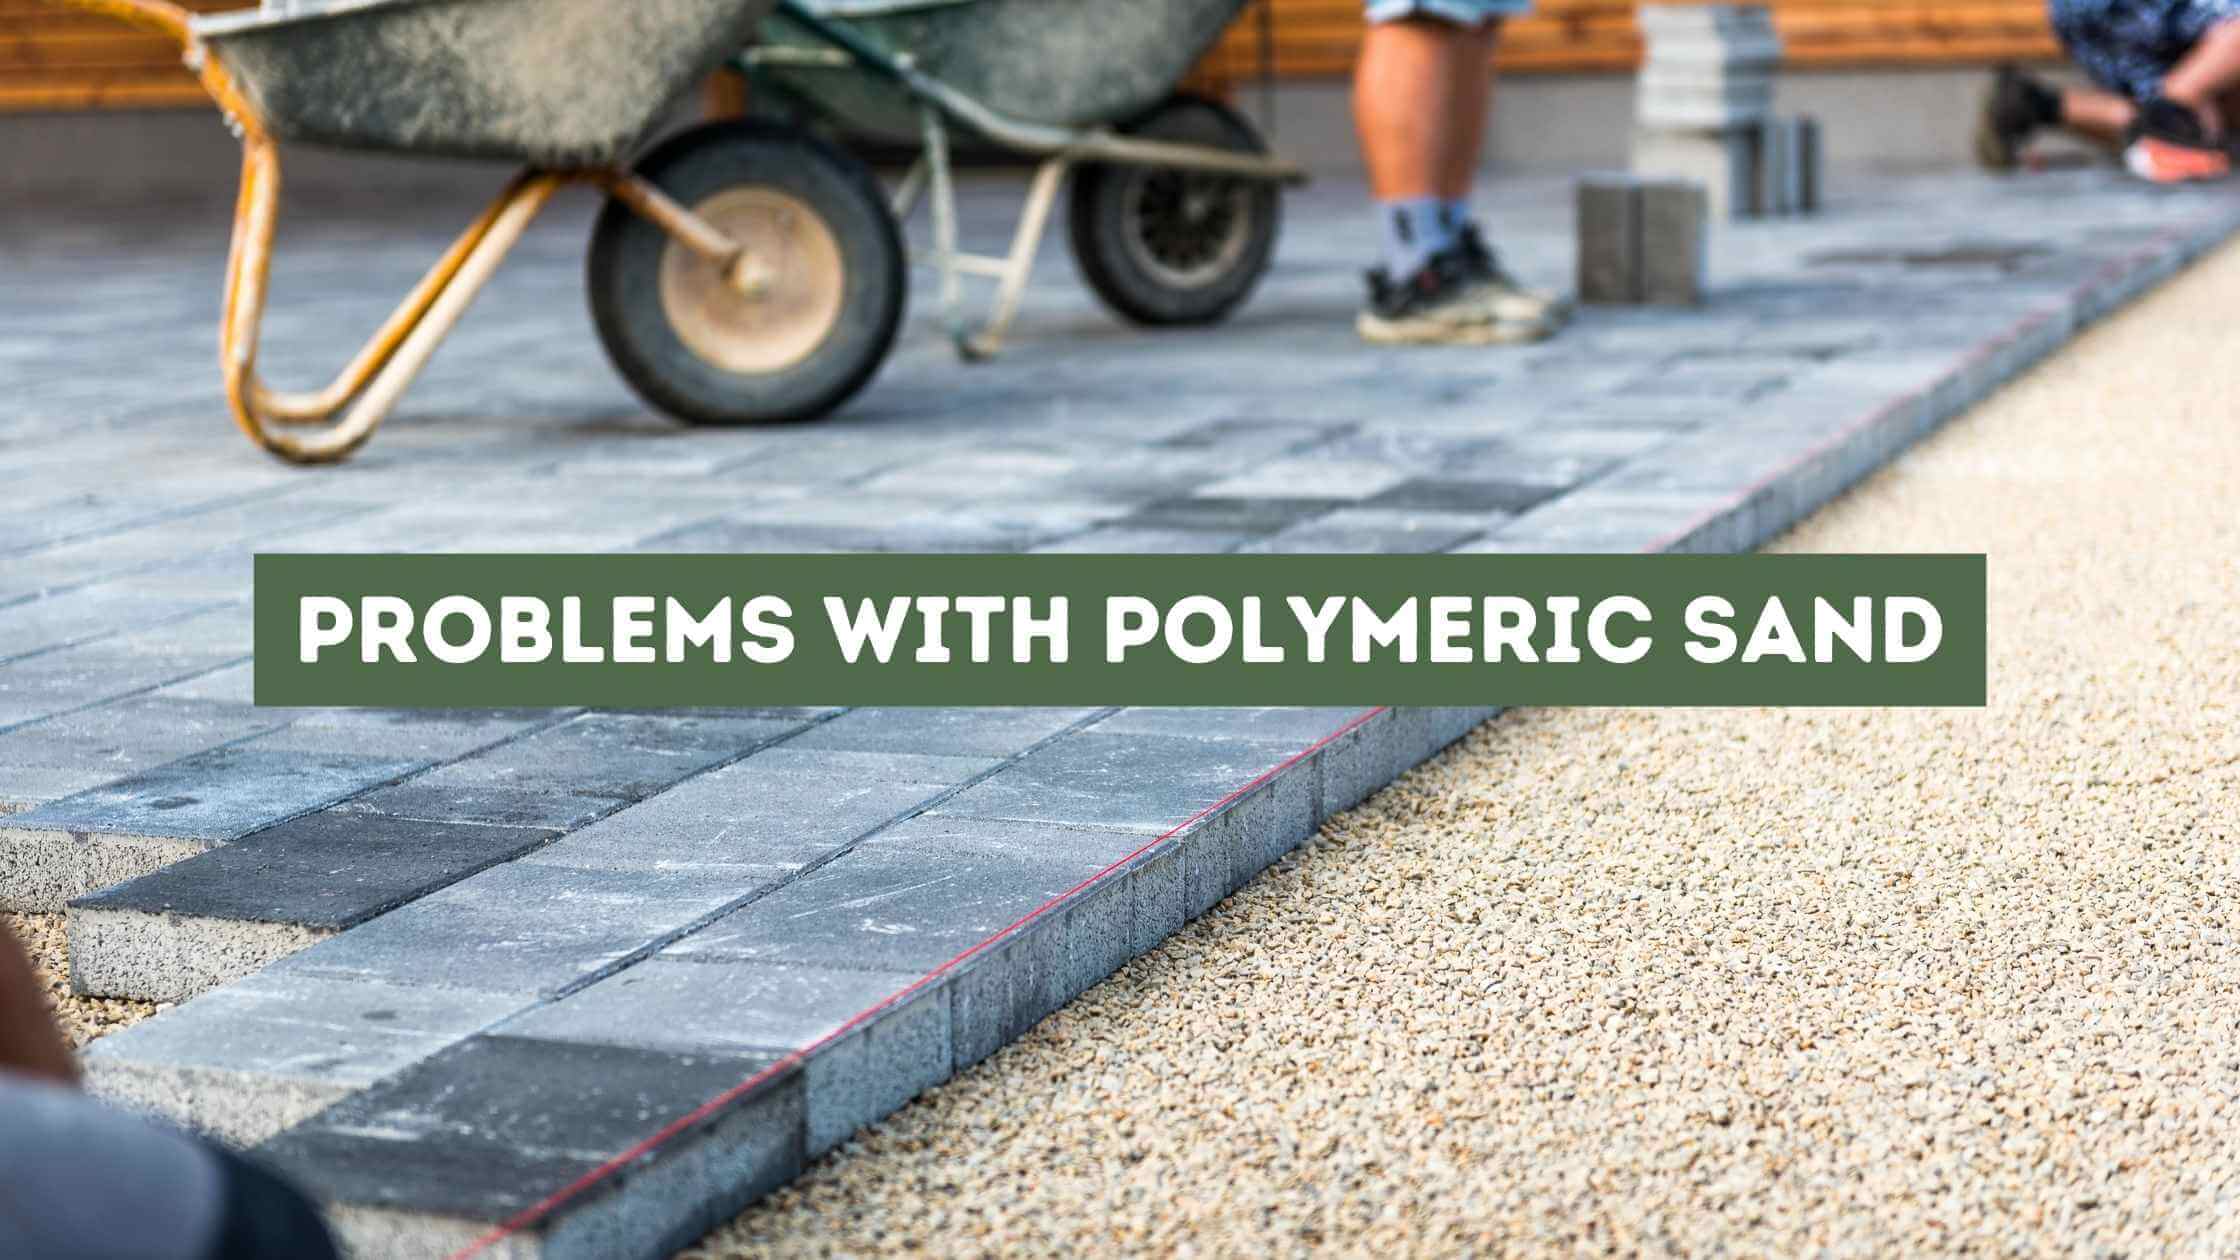 Problems with Polymeric Sand